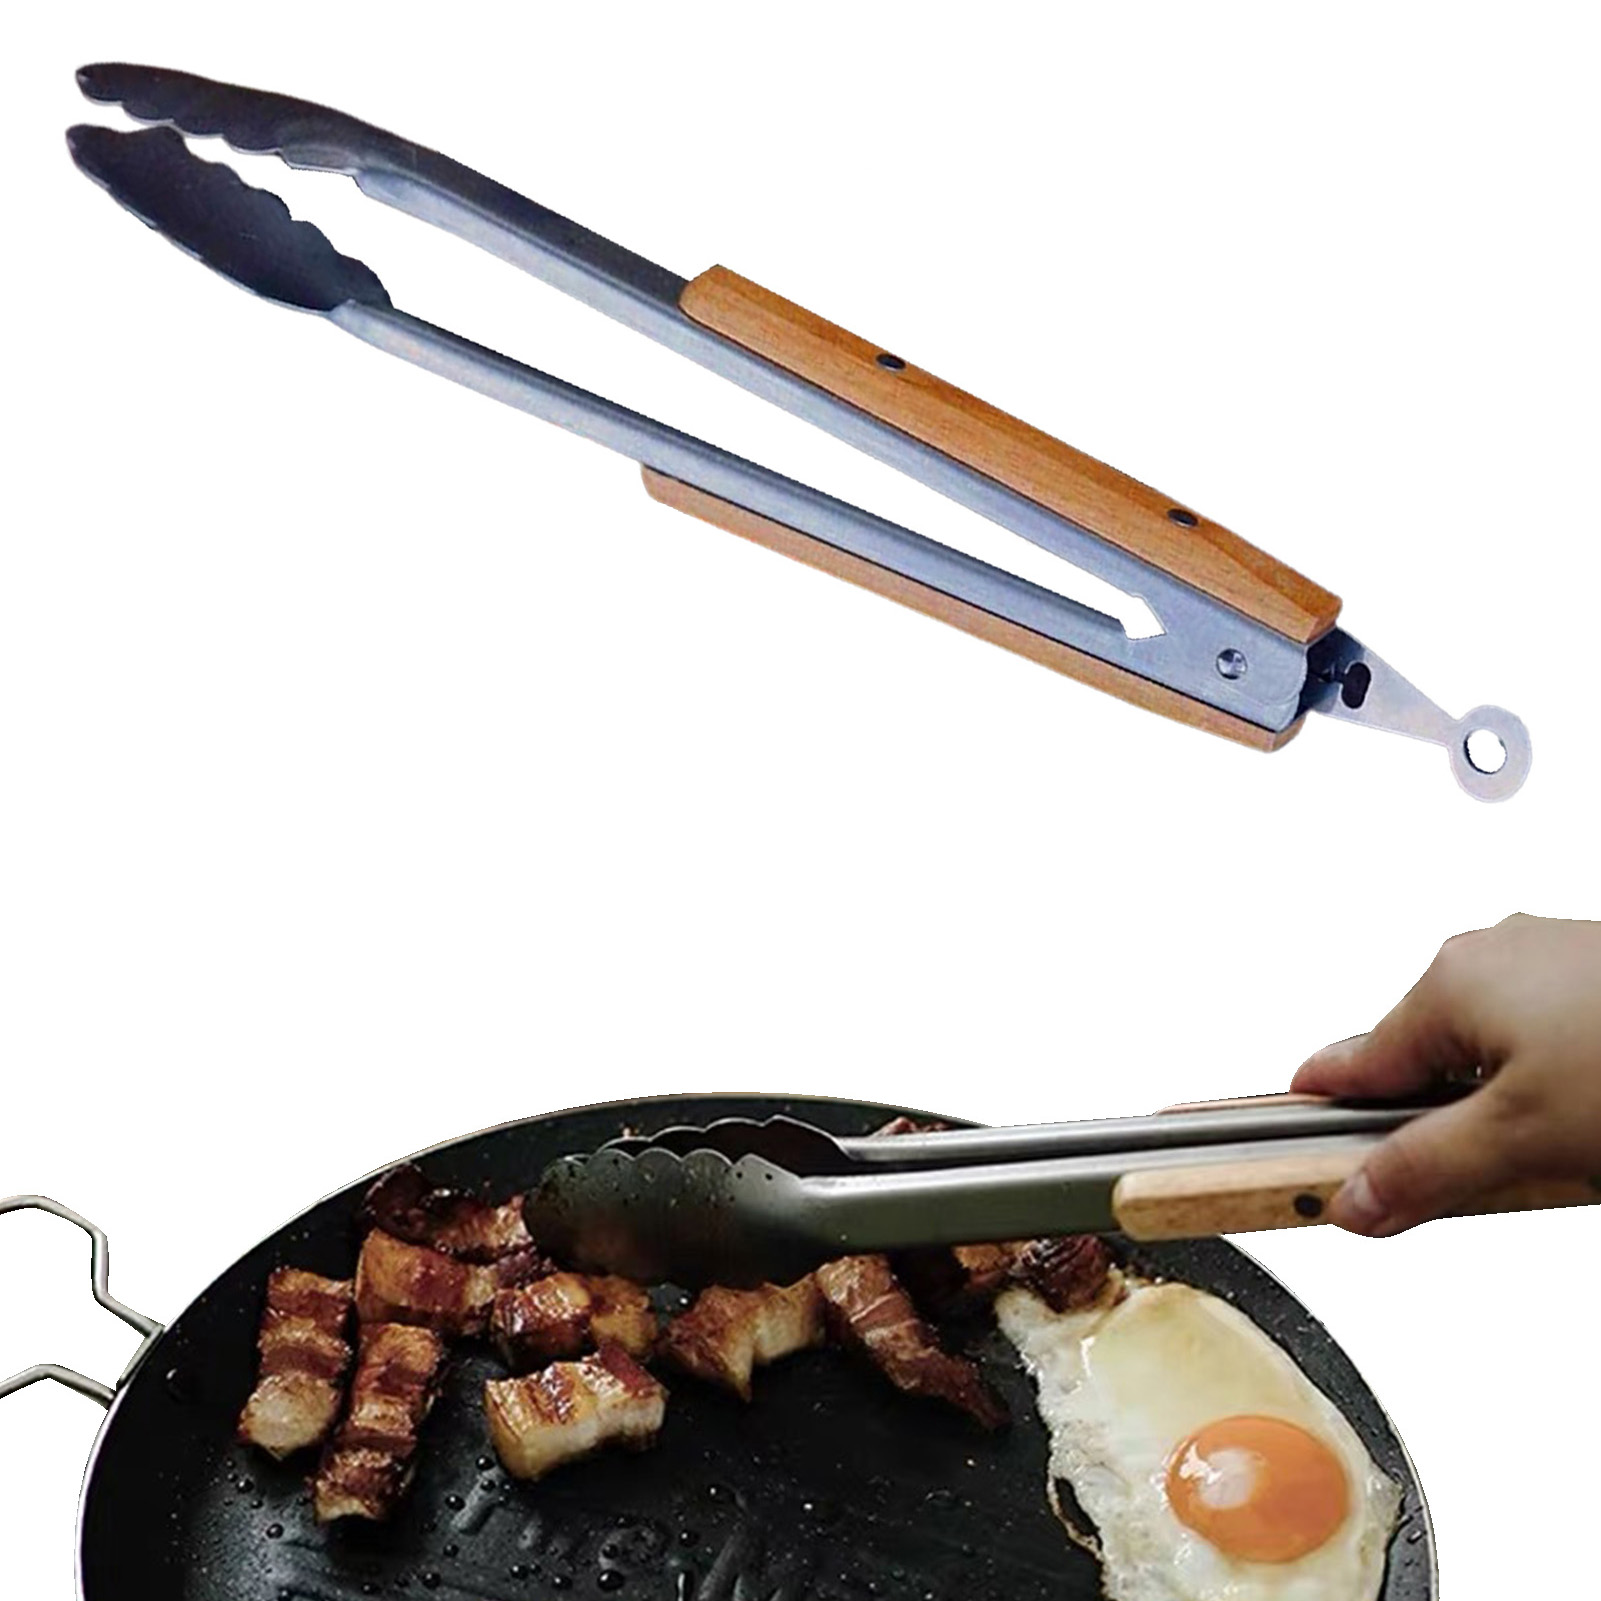 Cooking Grilling Locking Food Tongs with Heat Resistant Handle for Beefsteak Bread Hamburger MC889